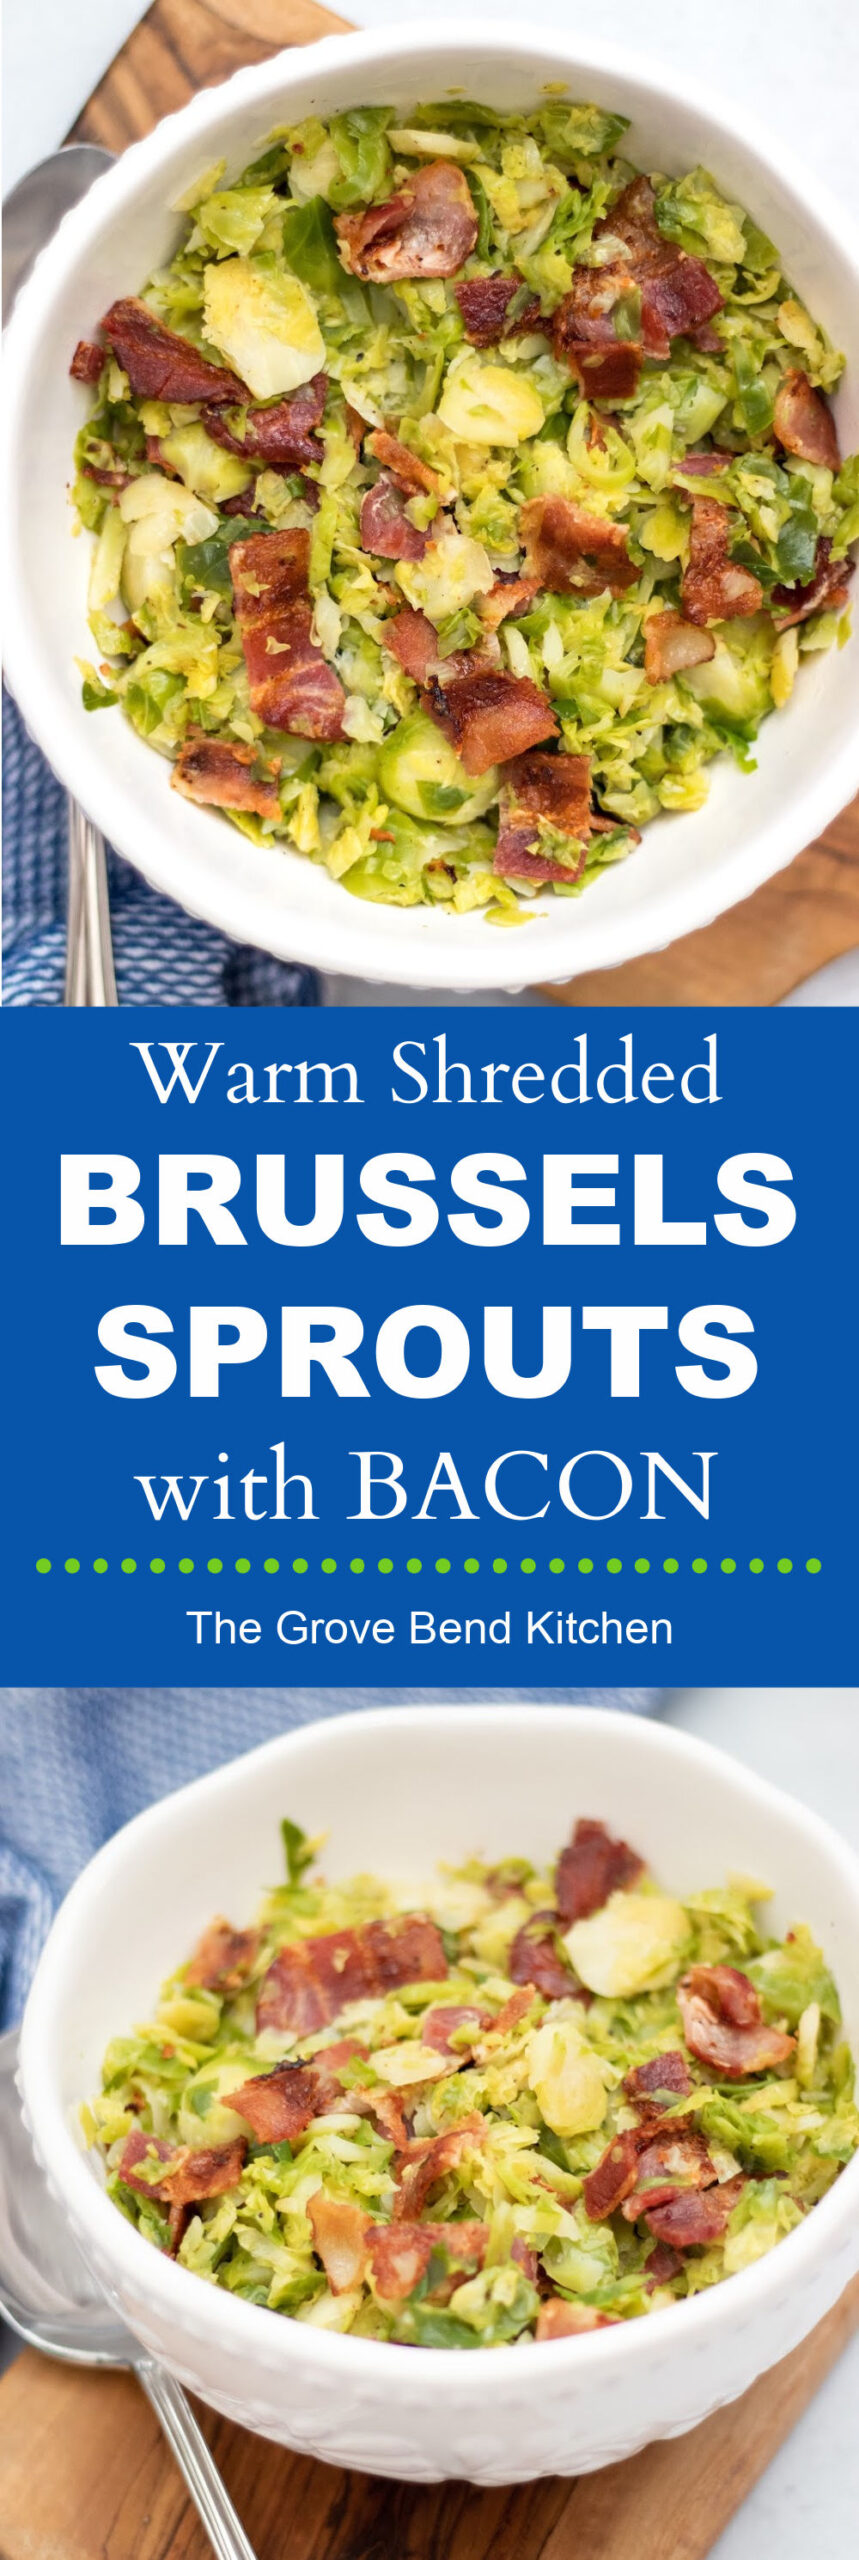 Warm Shredded Brussels Sprouts with Bacon - The Grove Bend Kitchen